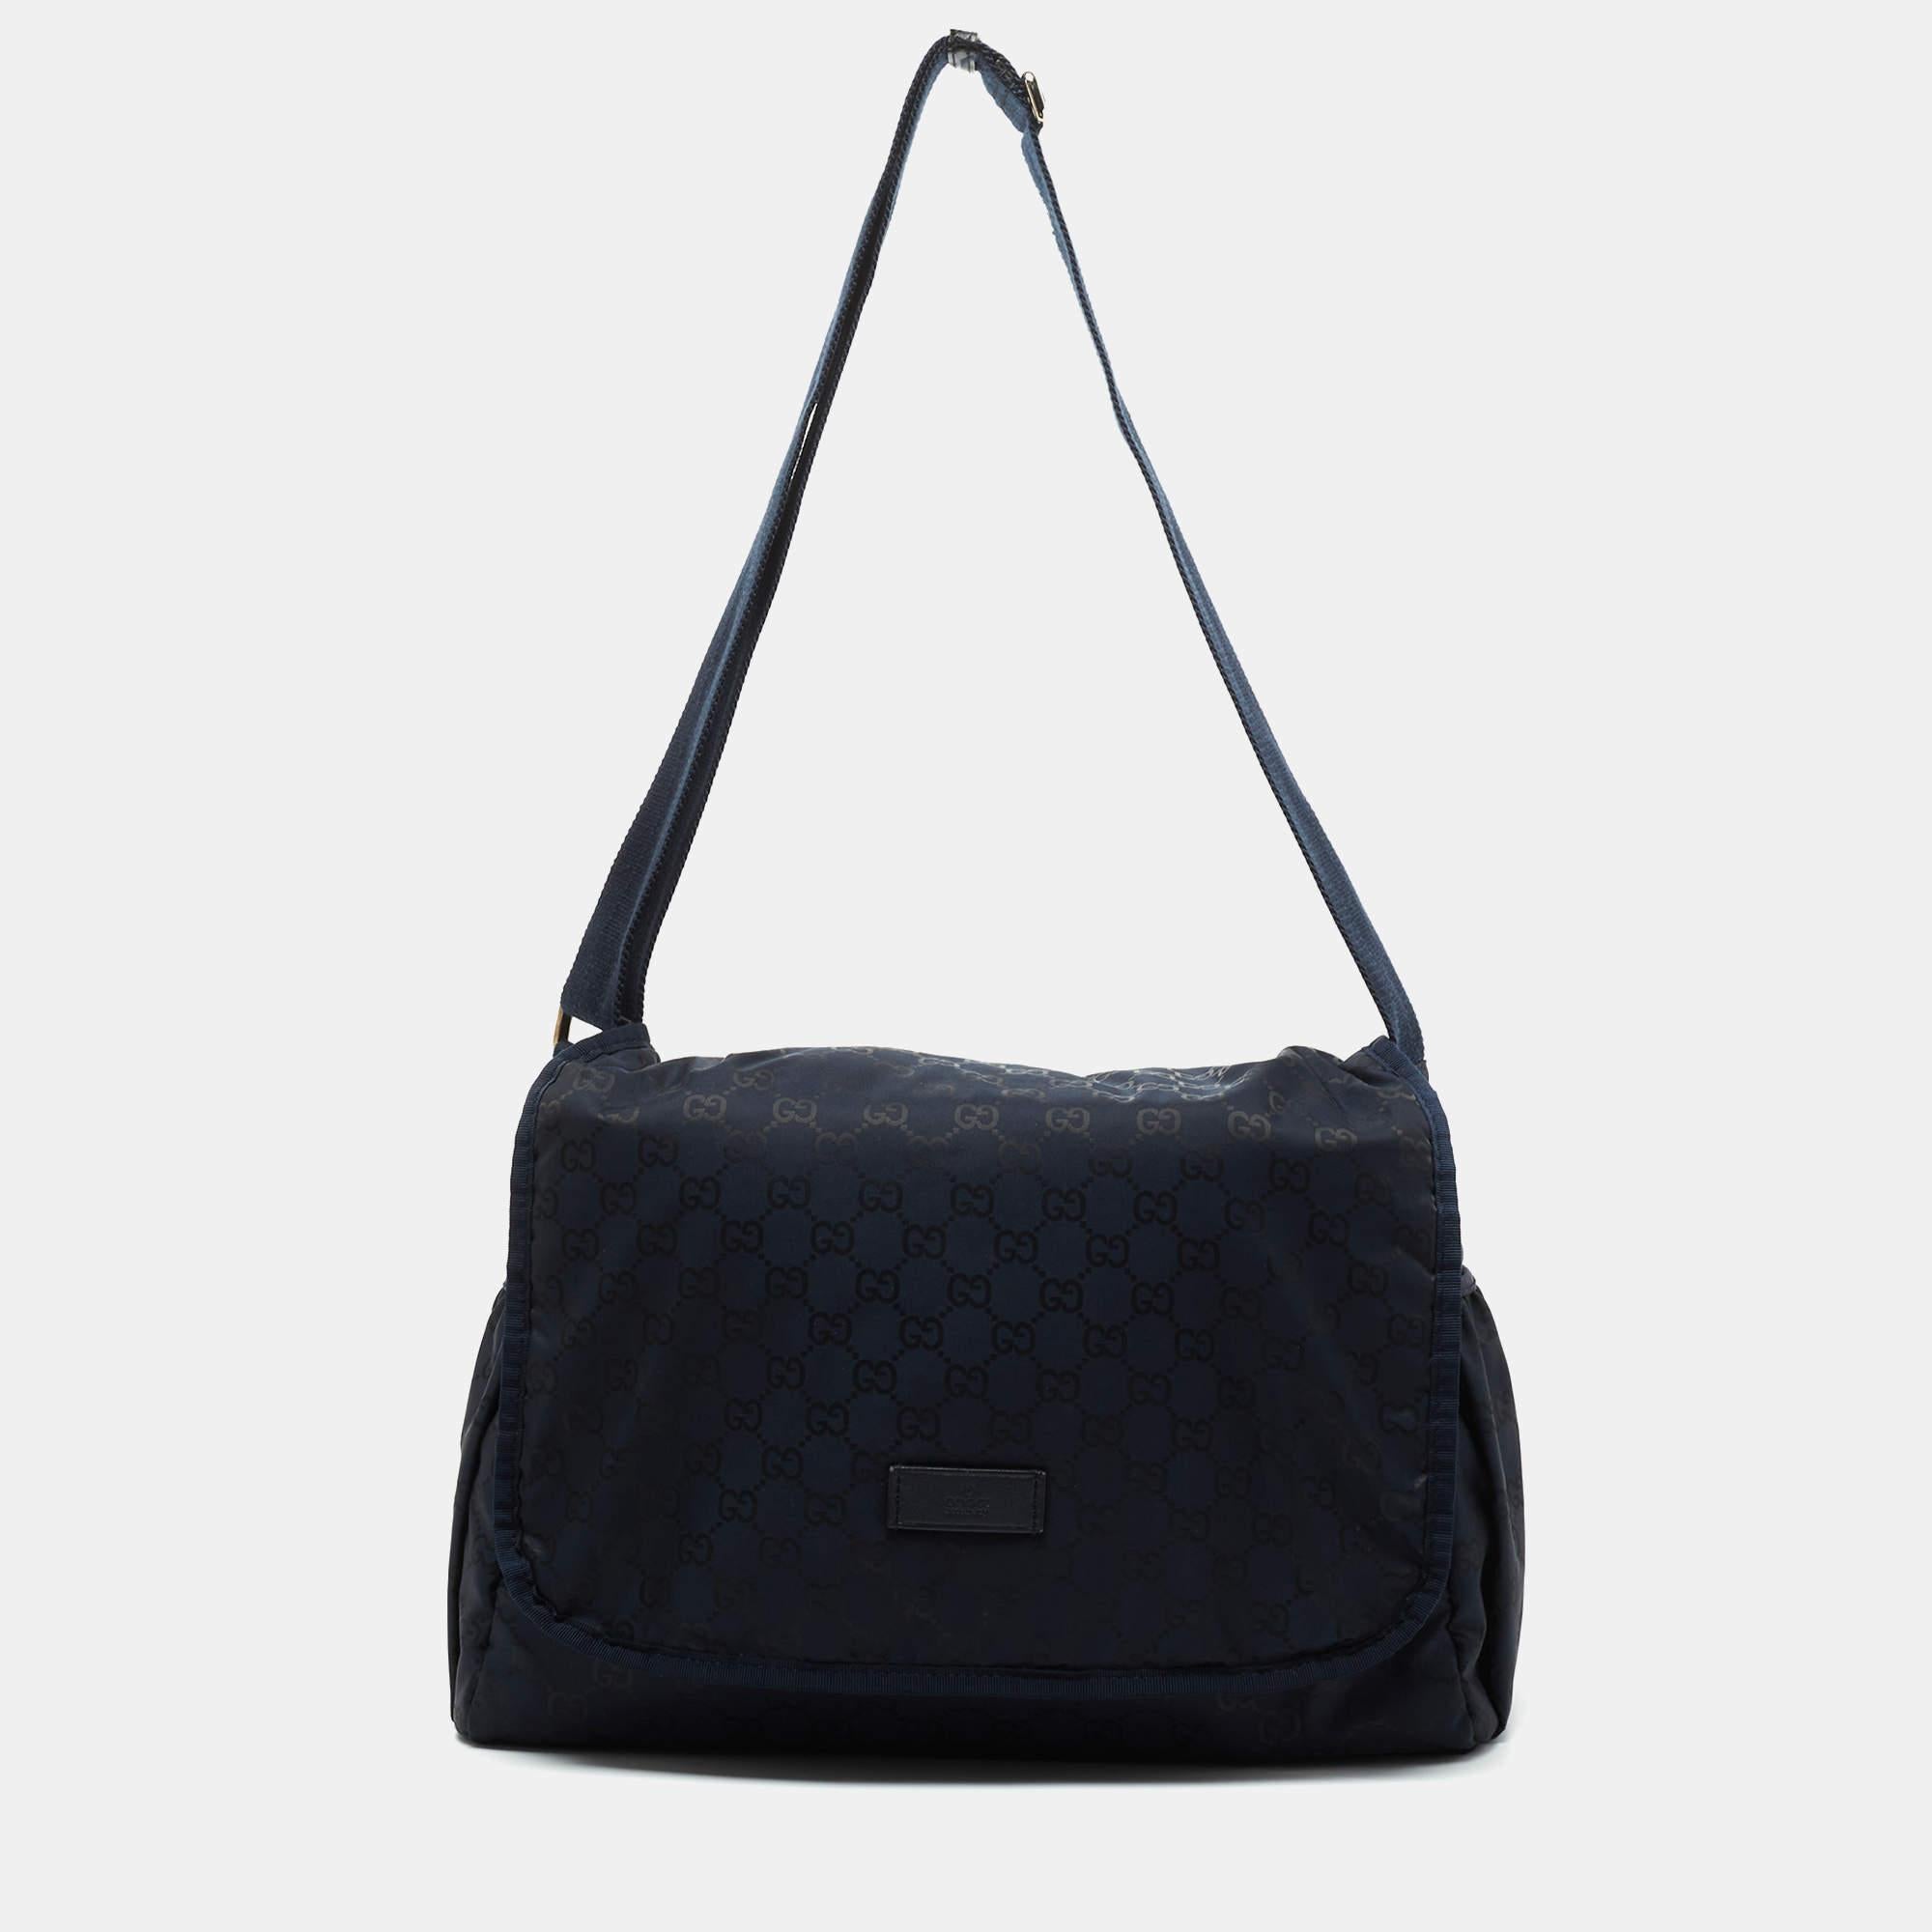 Smart and functional, this bag from Gucci ranks high on style. It has been made from the signature GG nylon and features a front flap closure. The bag is equipped with an adjustable shoulder strap and a spacious nylon-lined interior that can easily